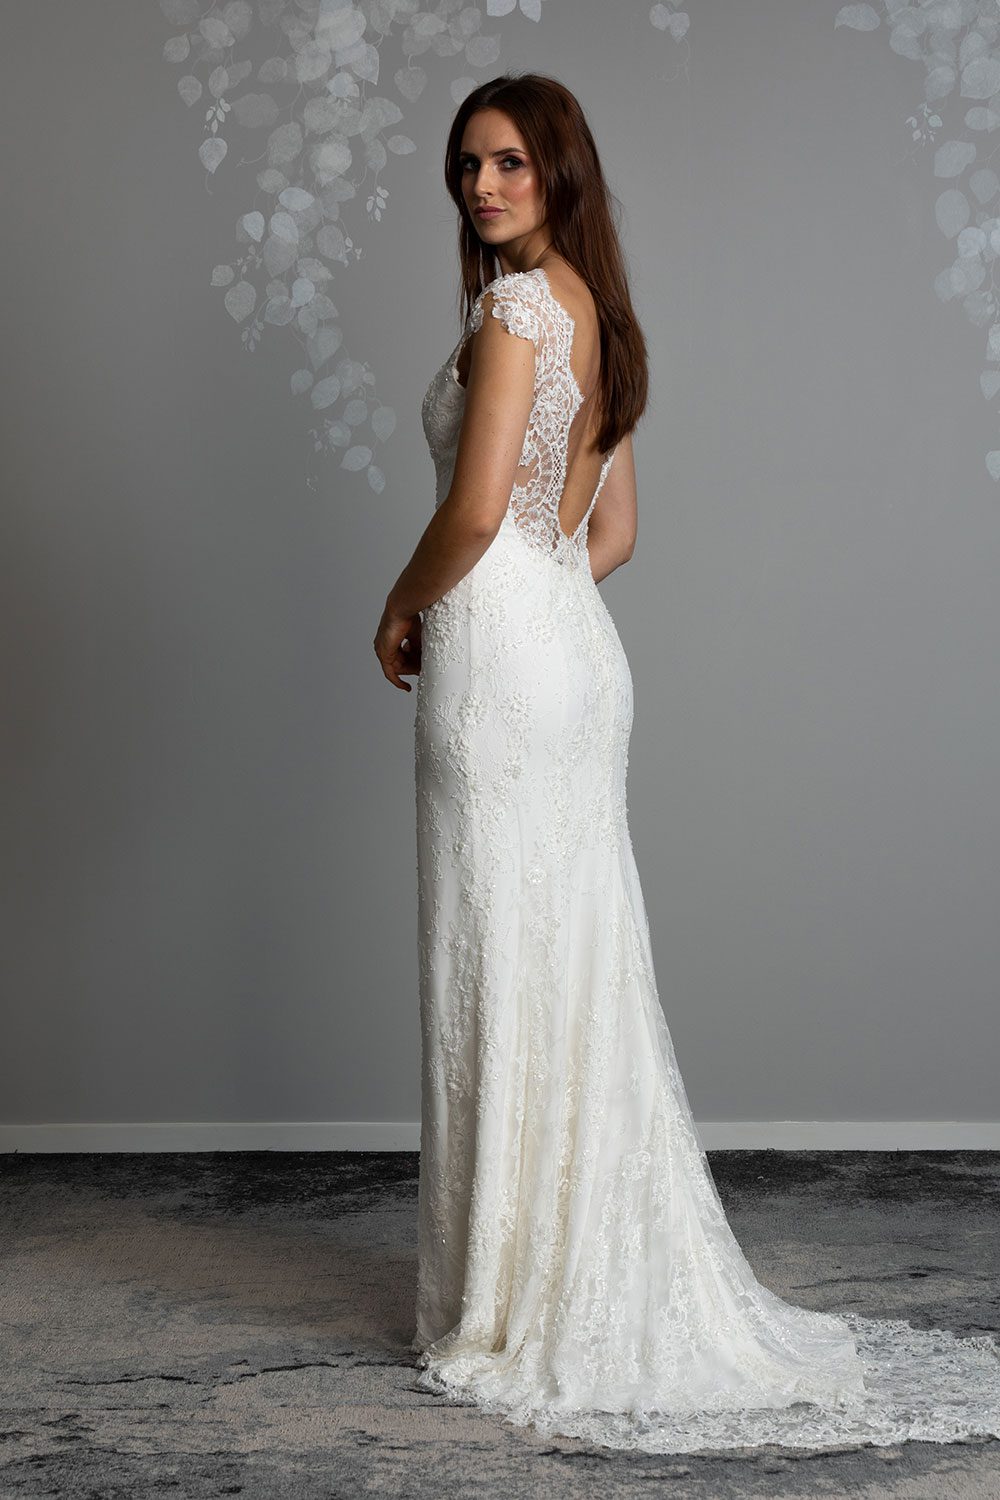 Fallyn Wedding gown from Vinka Design - This wedding dress is a timeless classic. Dramatic scallop lace and deep V-shaped neckline with beautiful low back and mini cap sleeves. This gown is cut in a fit-and-flare design with a side split. Full length view of back of gown with long train and beautiful scallop lace across low cut back